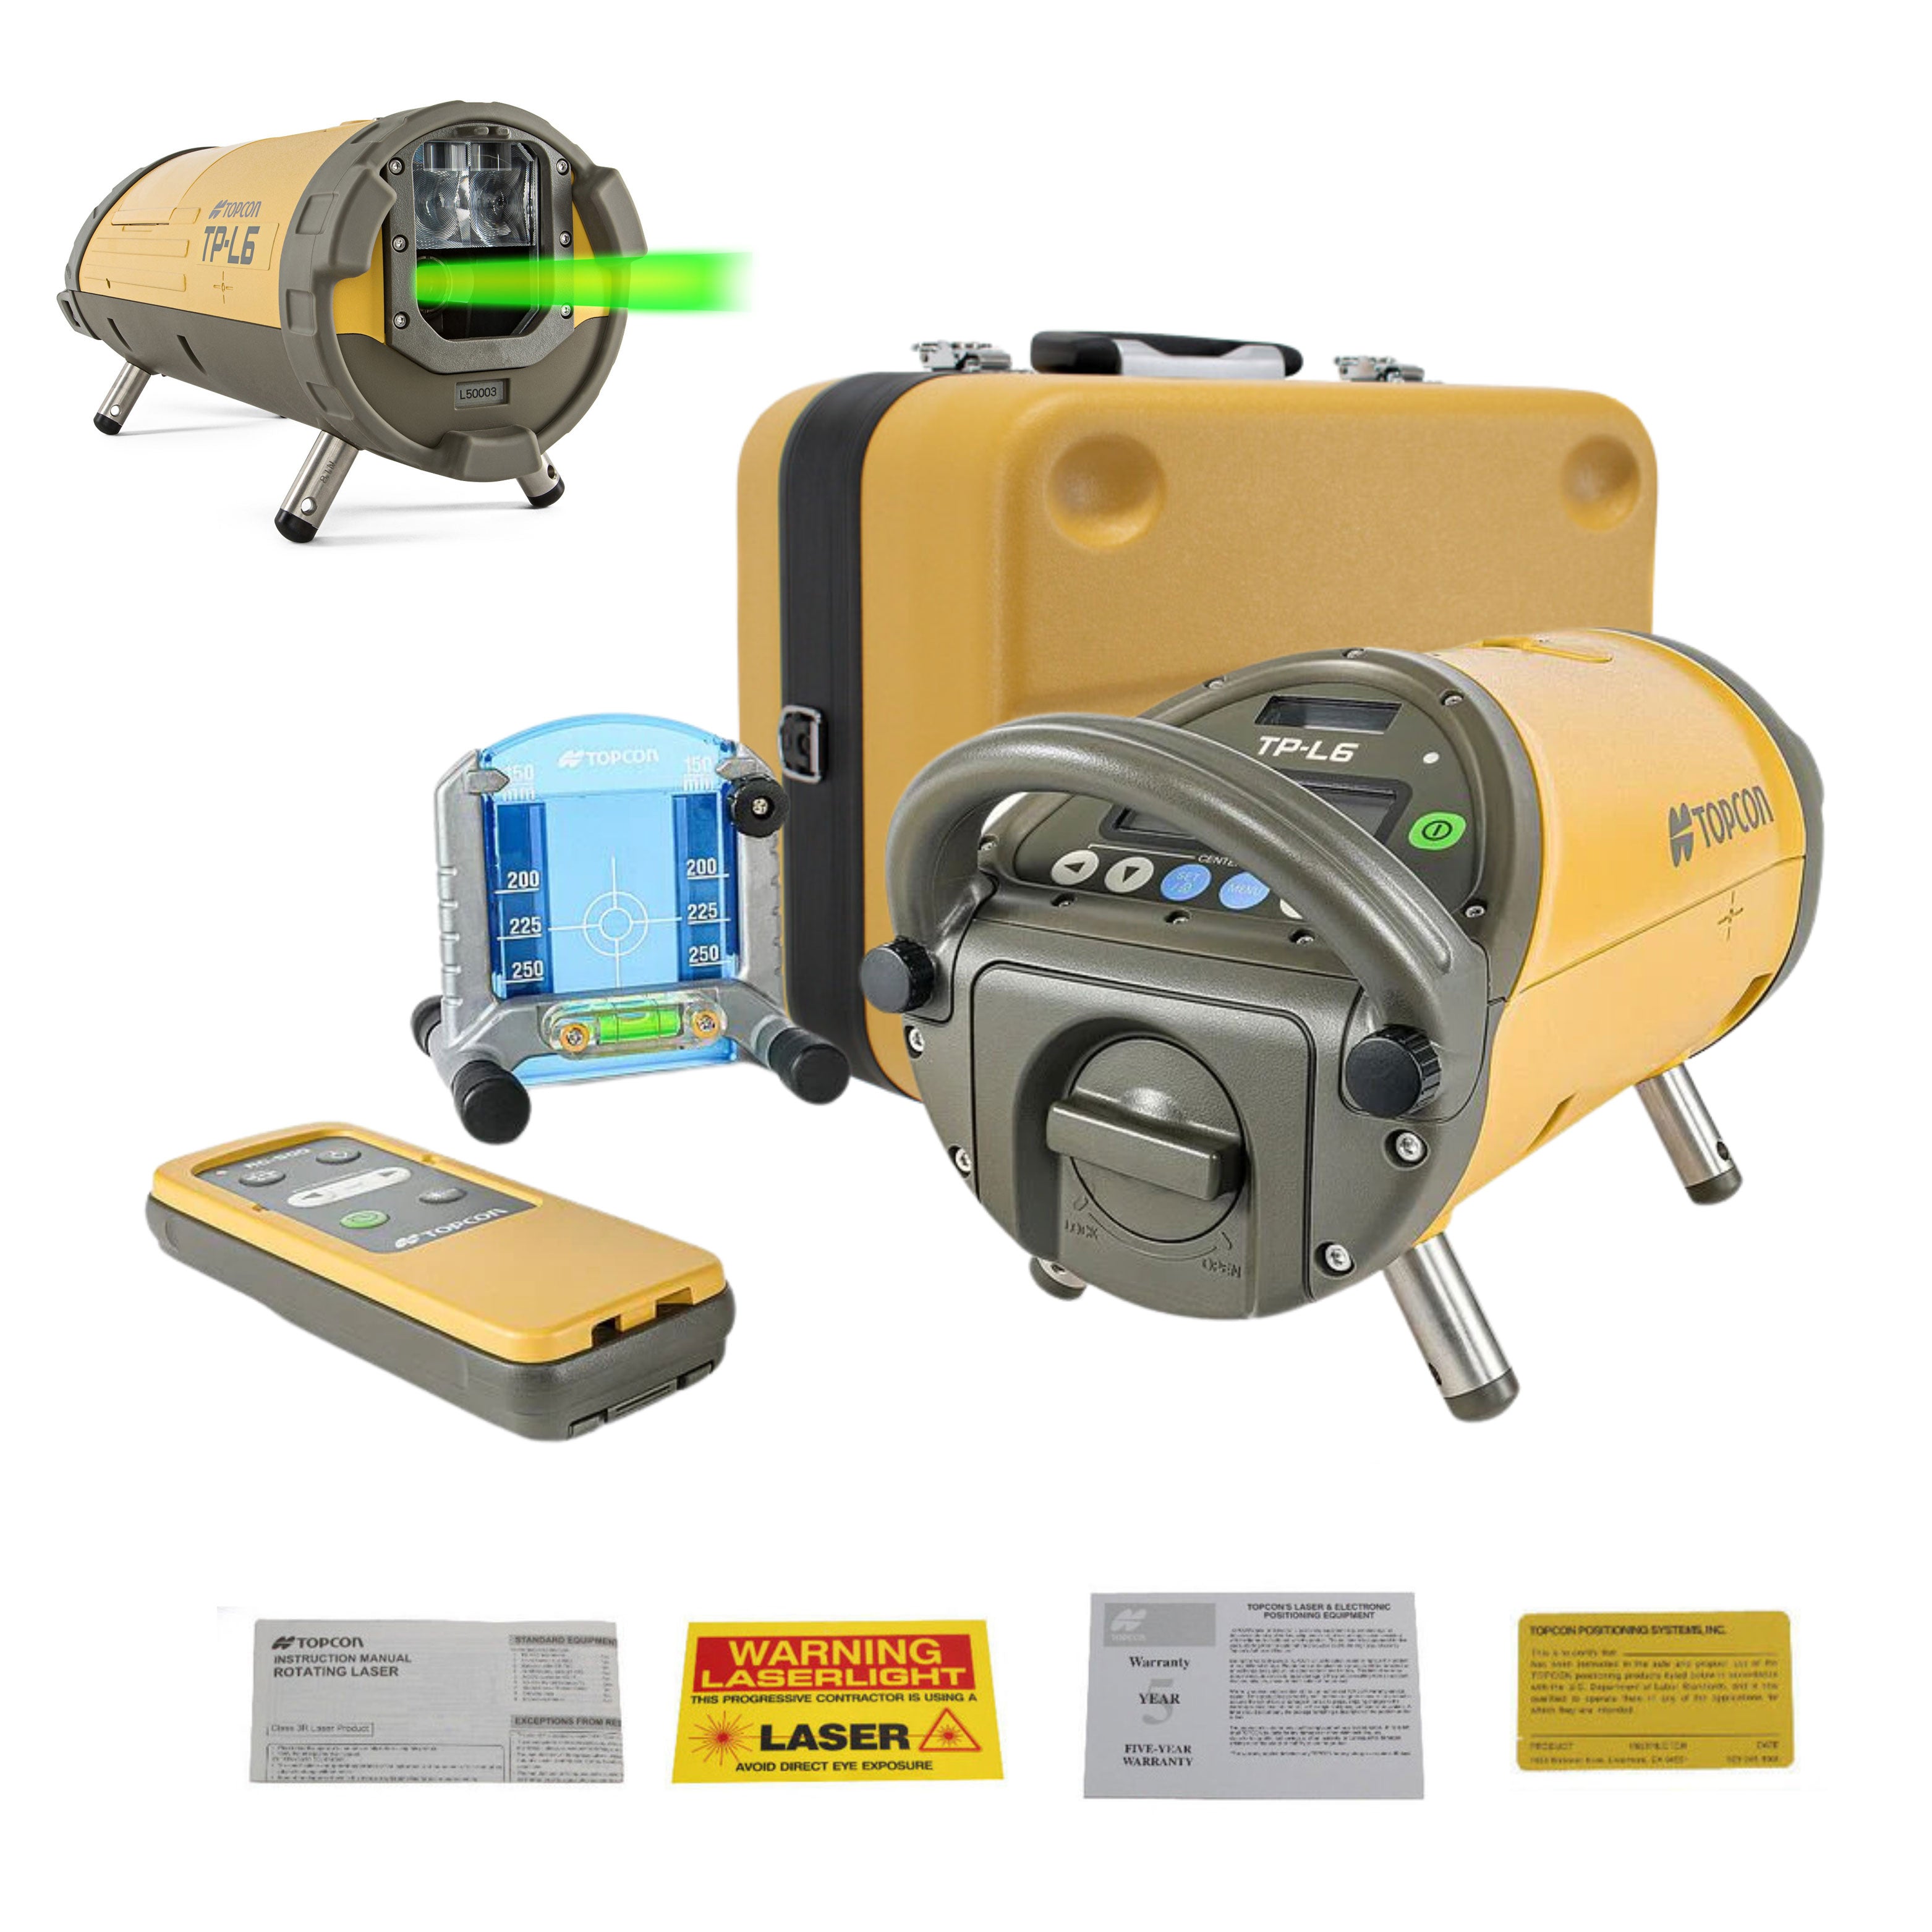 Topcon TP-L6 Pipe Laser For Trenching, Sewers, Tunneling, and Pipe Alignment